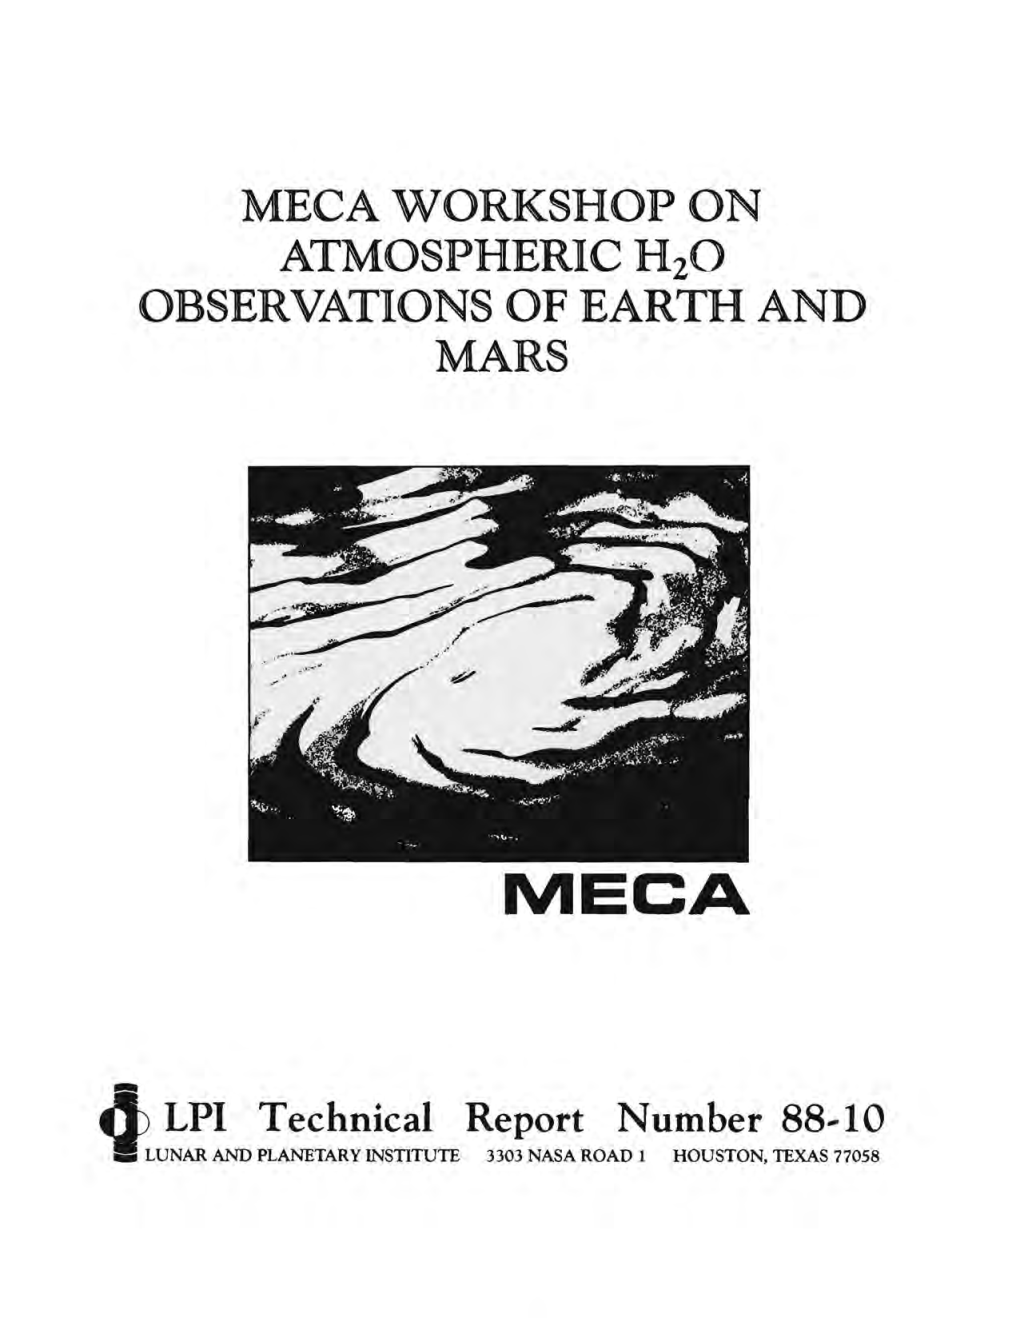 MECA Workshop on Atmospheric H2O Observations of Earth and Mars